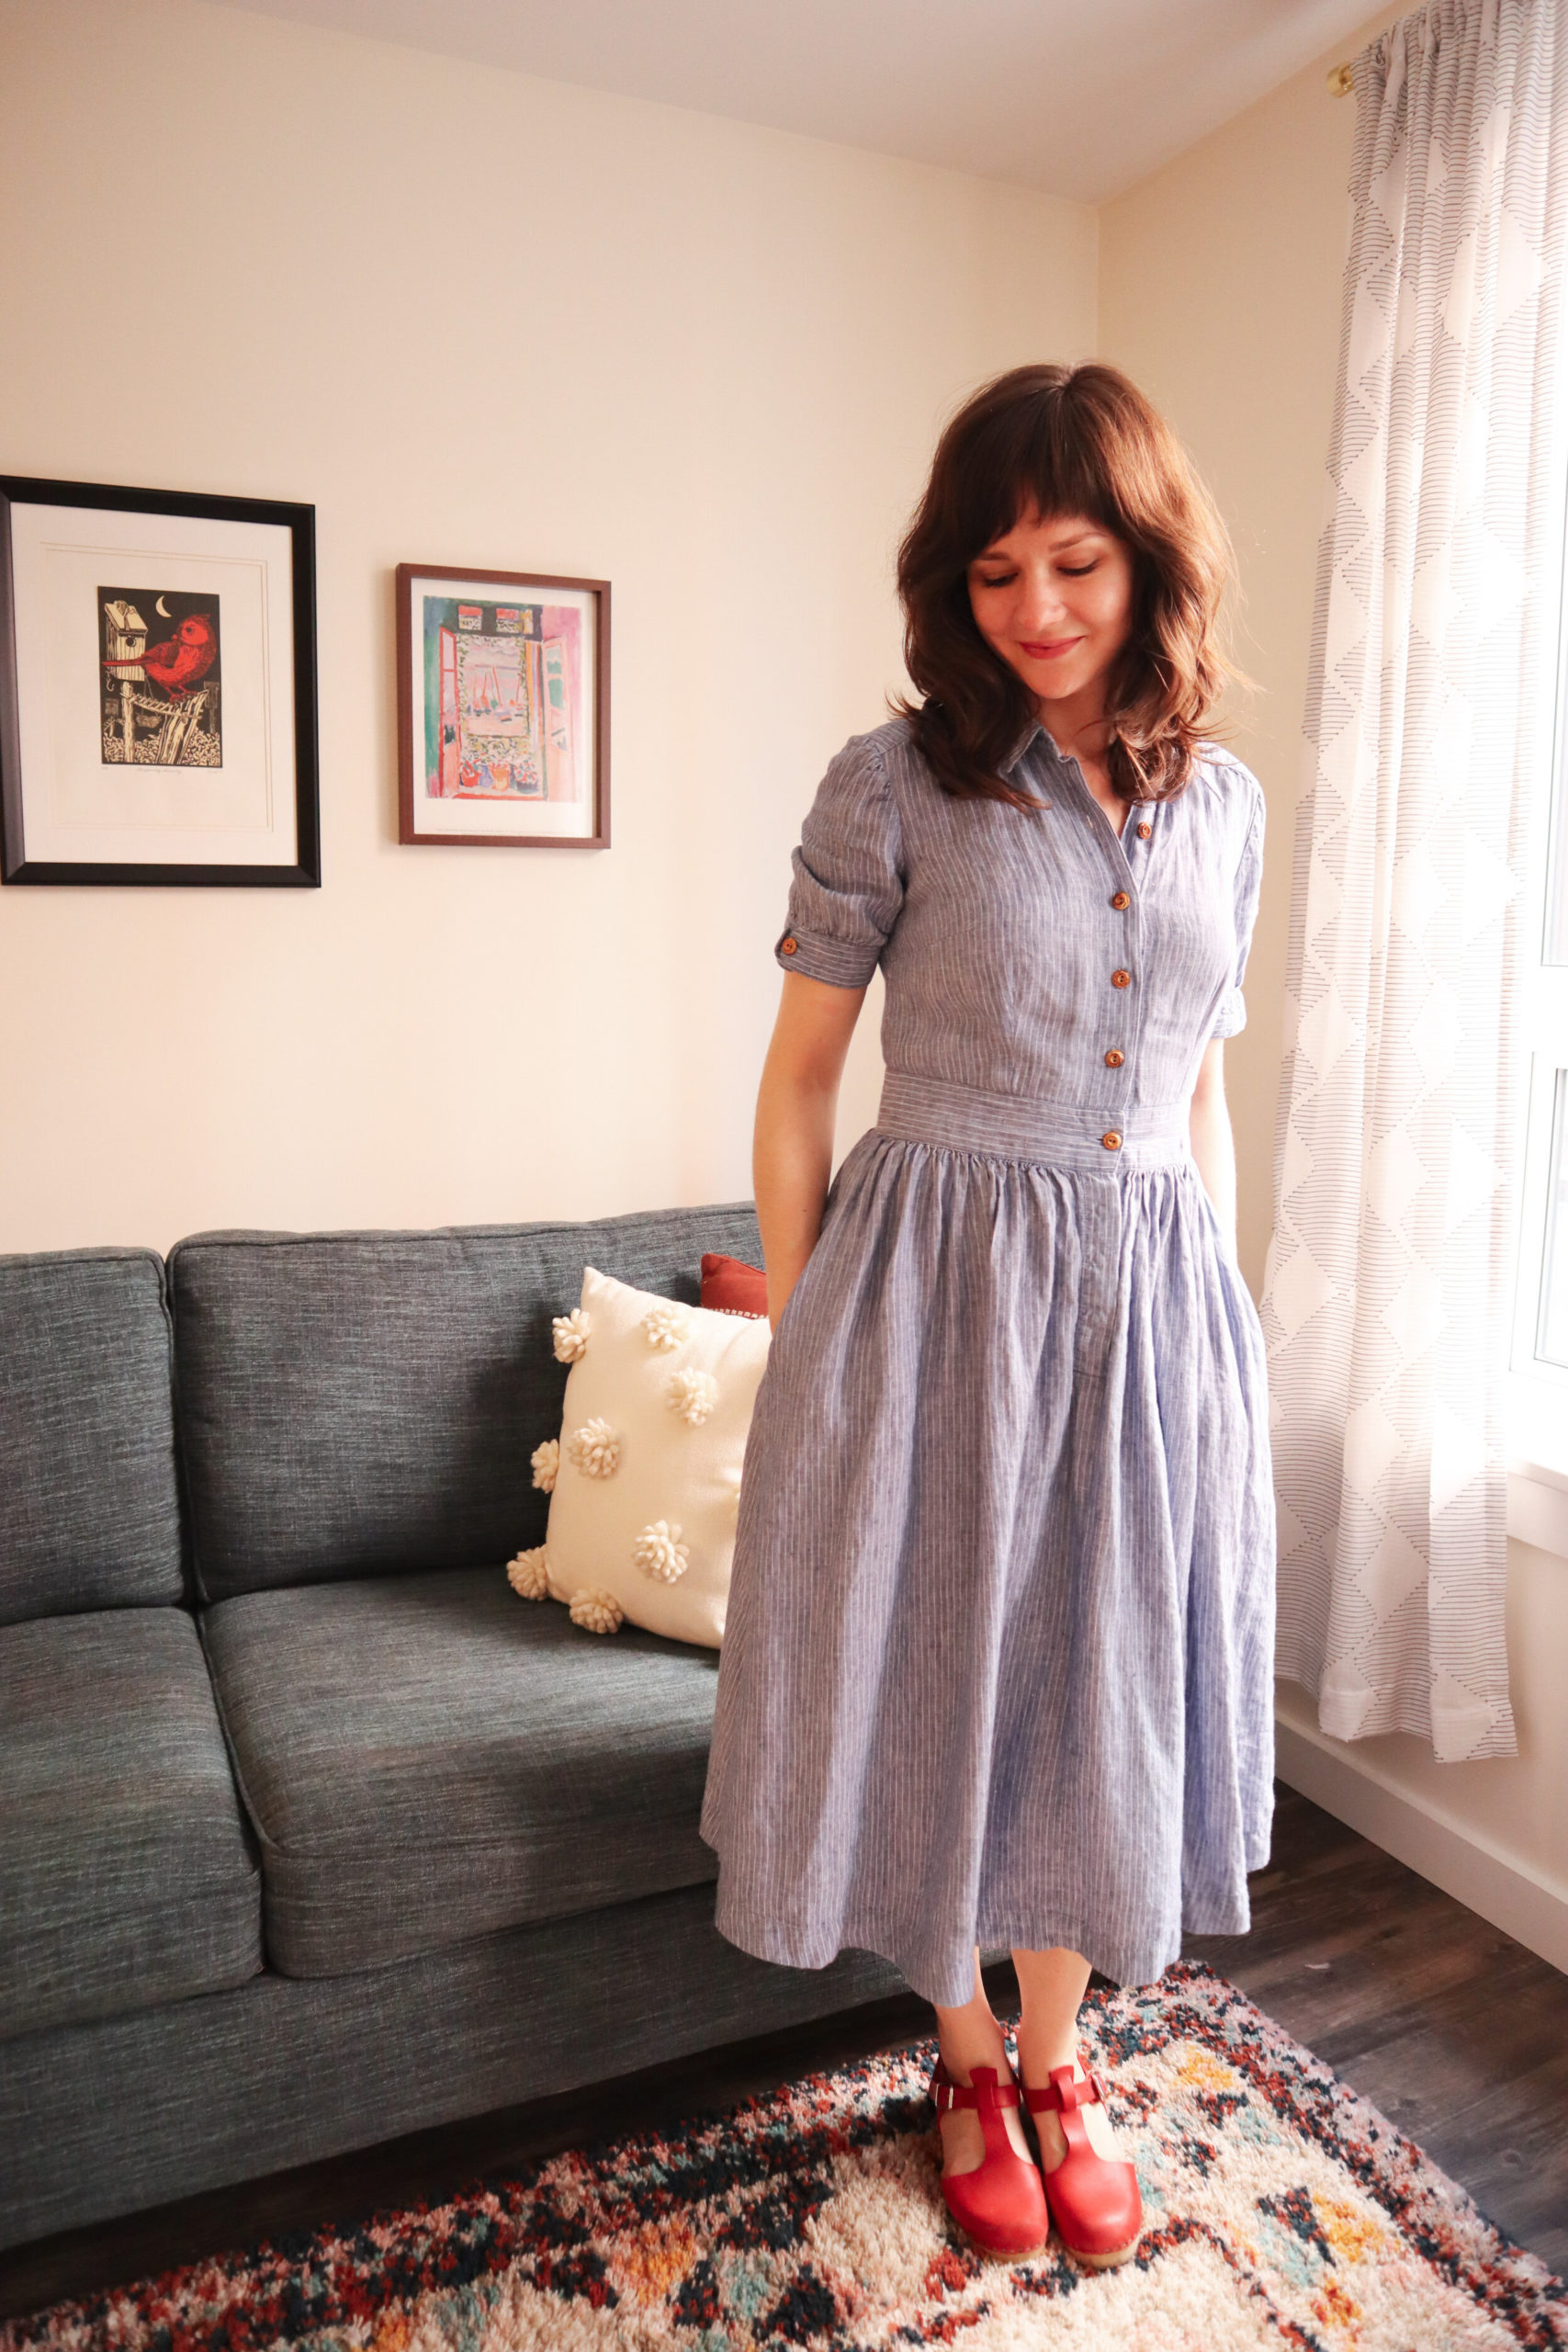 Meredith wears a blue and white pink striped fit and flare shirt dress with red clogs